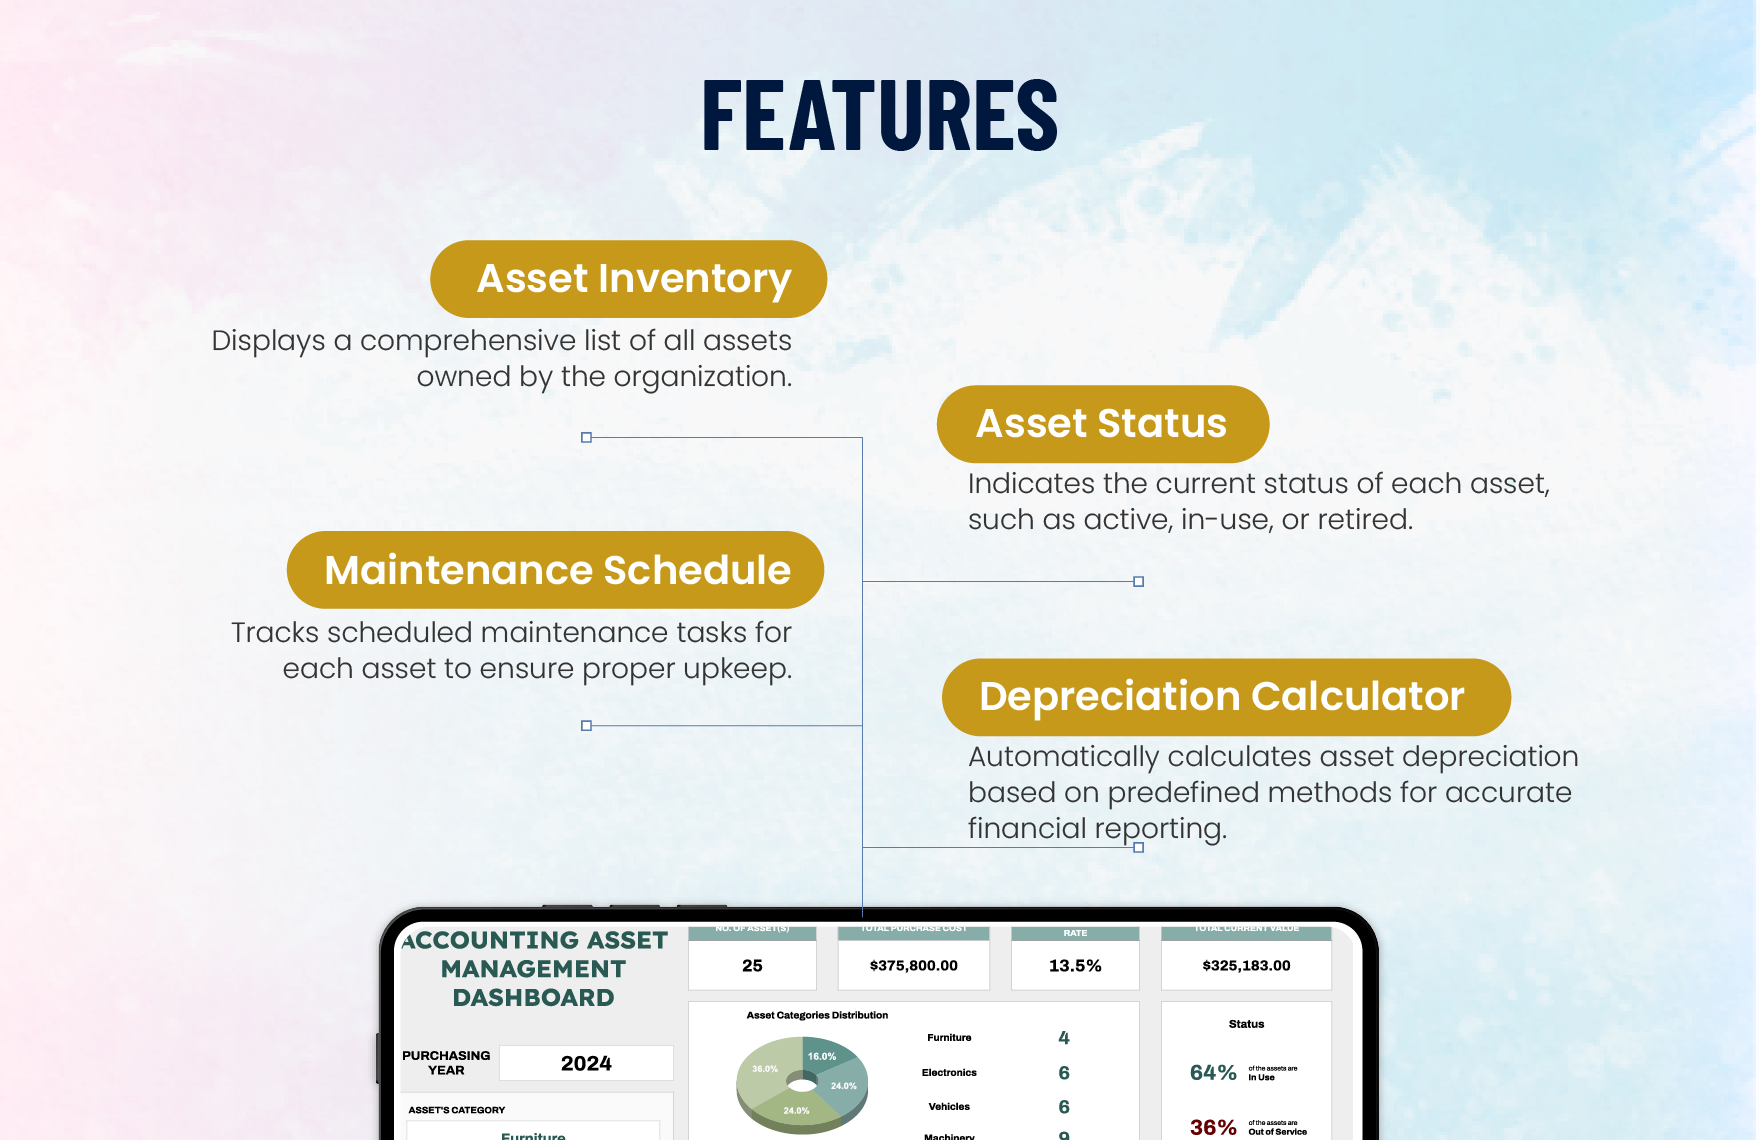 Accounting Asset Management Dashboard Template